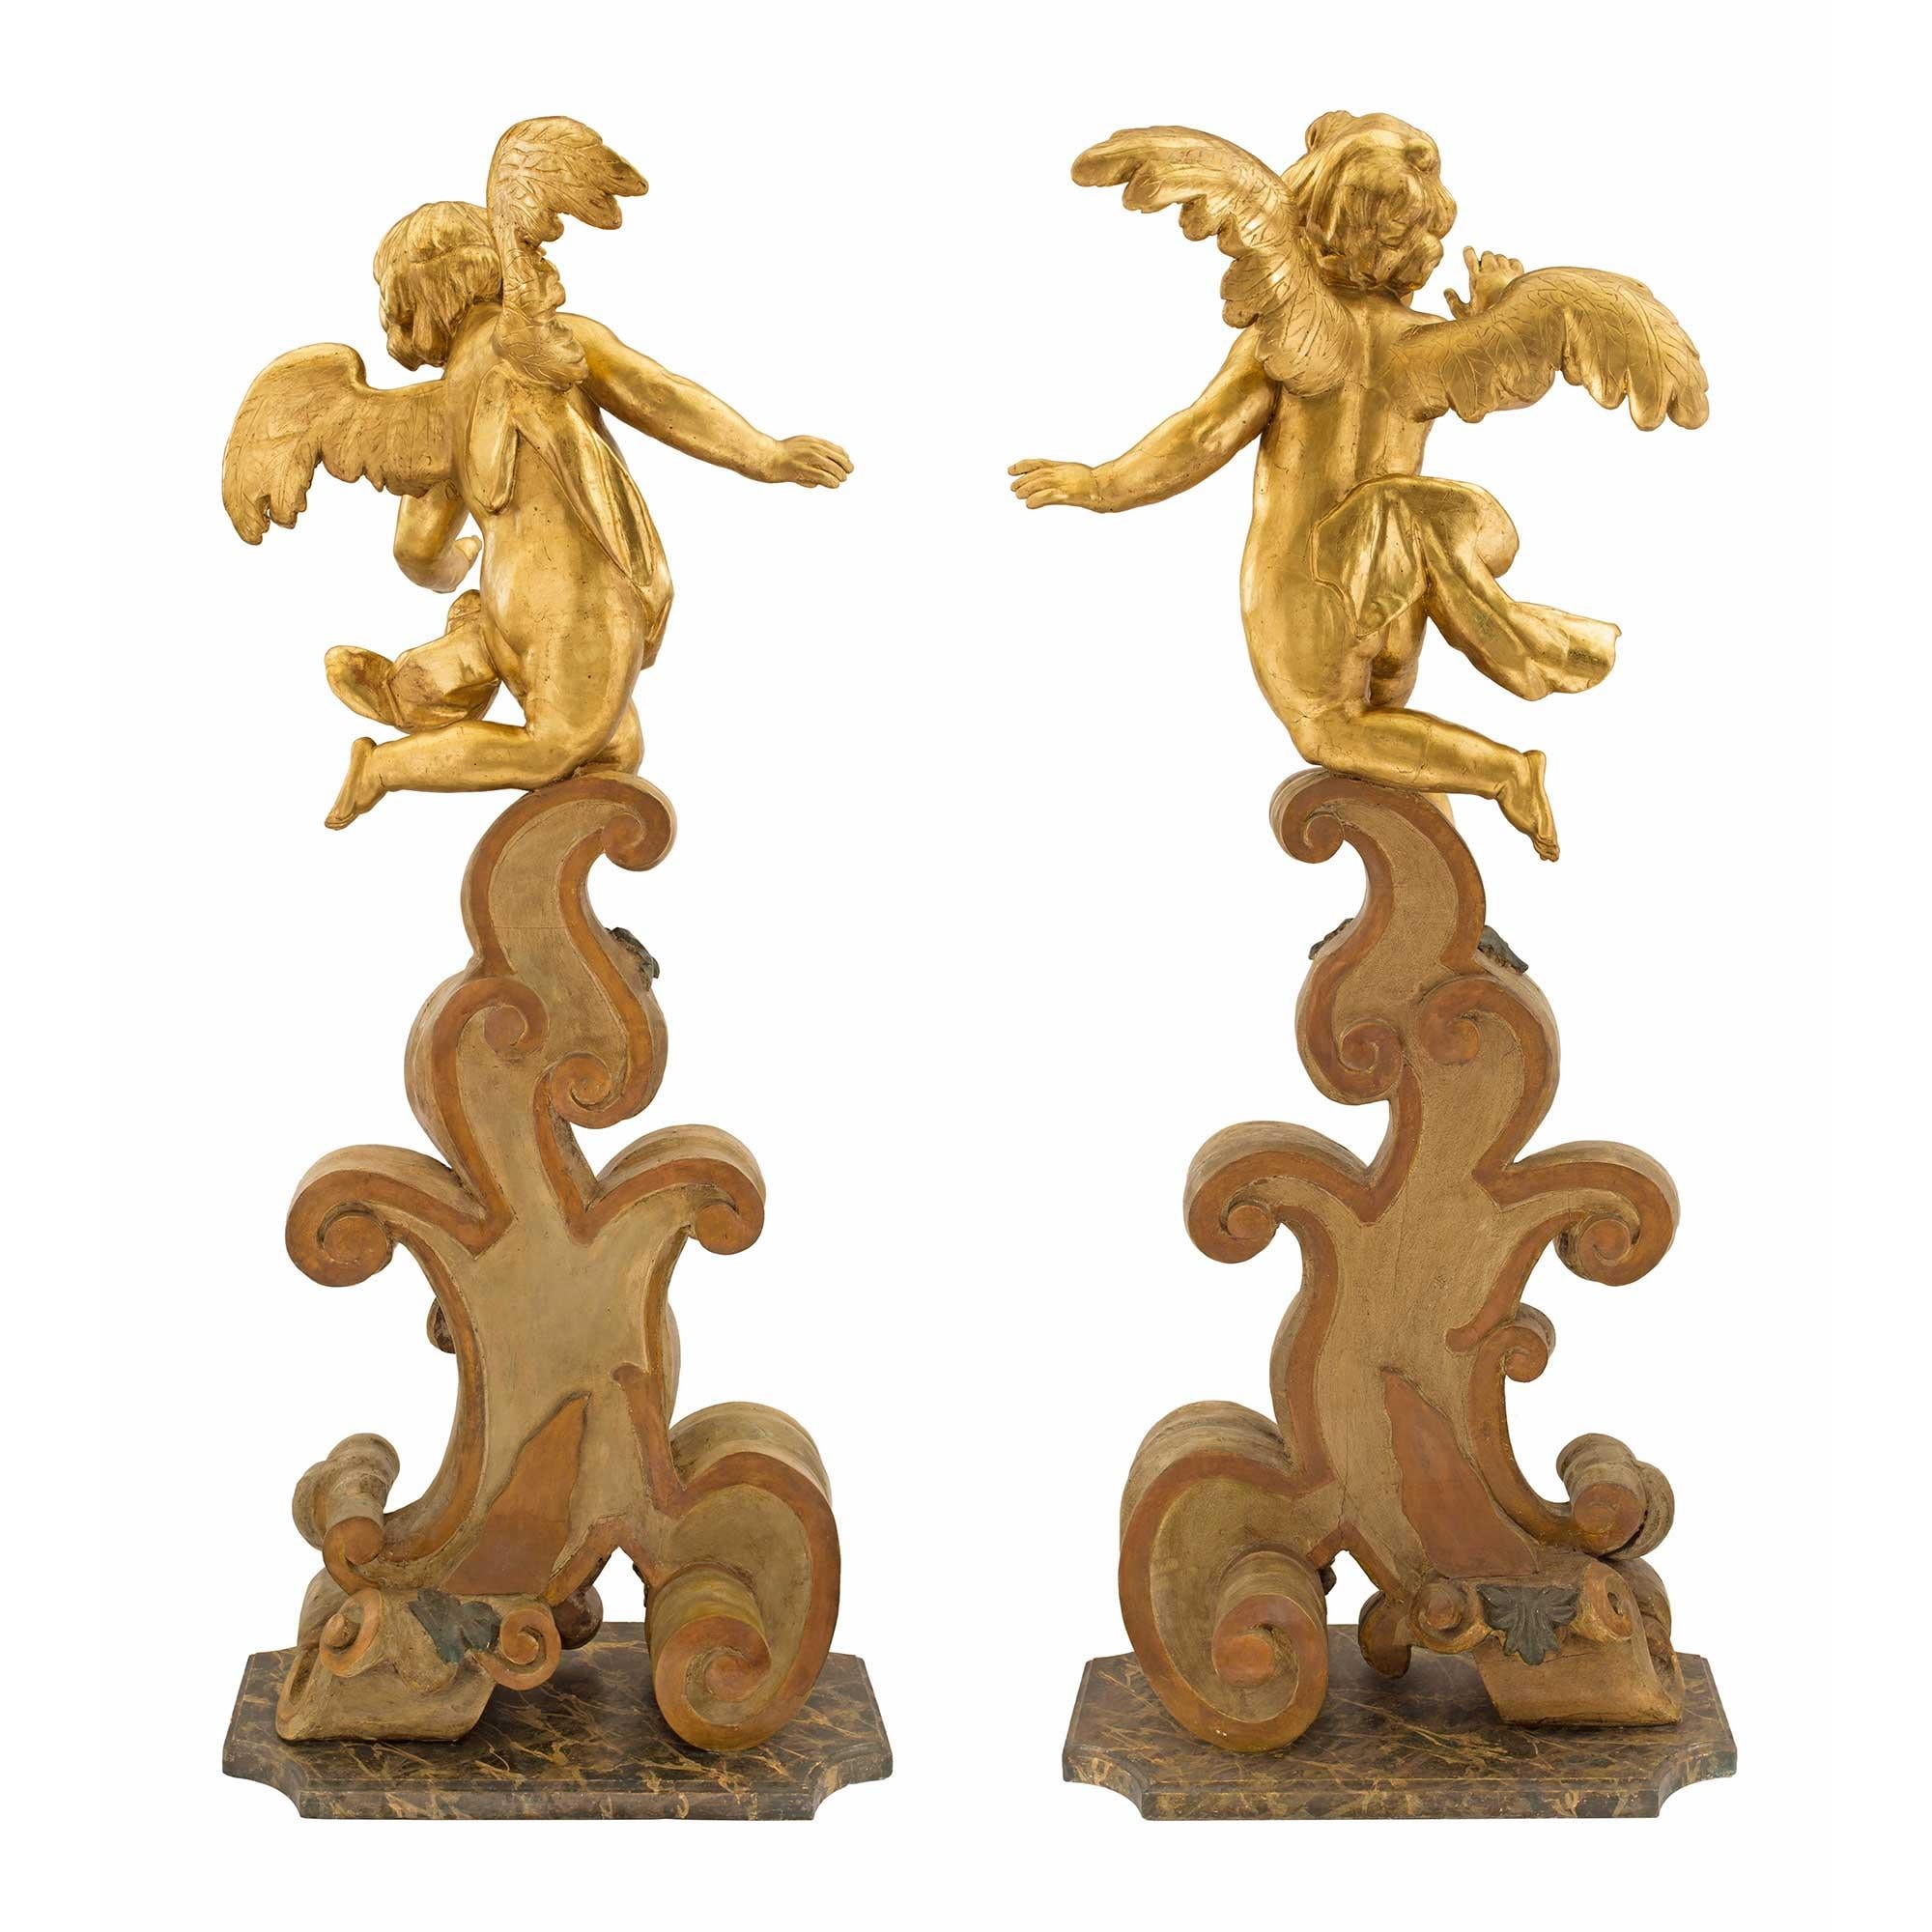 Italian 18th Century Baroque Giltwood and Polychrome Cherub Statues In Good Condition For Sale In West Palm Beach, FL